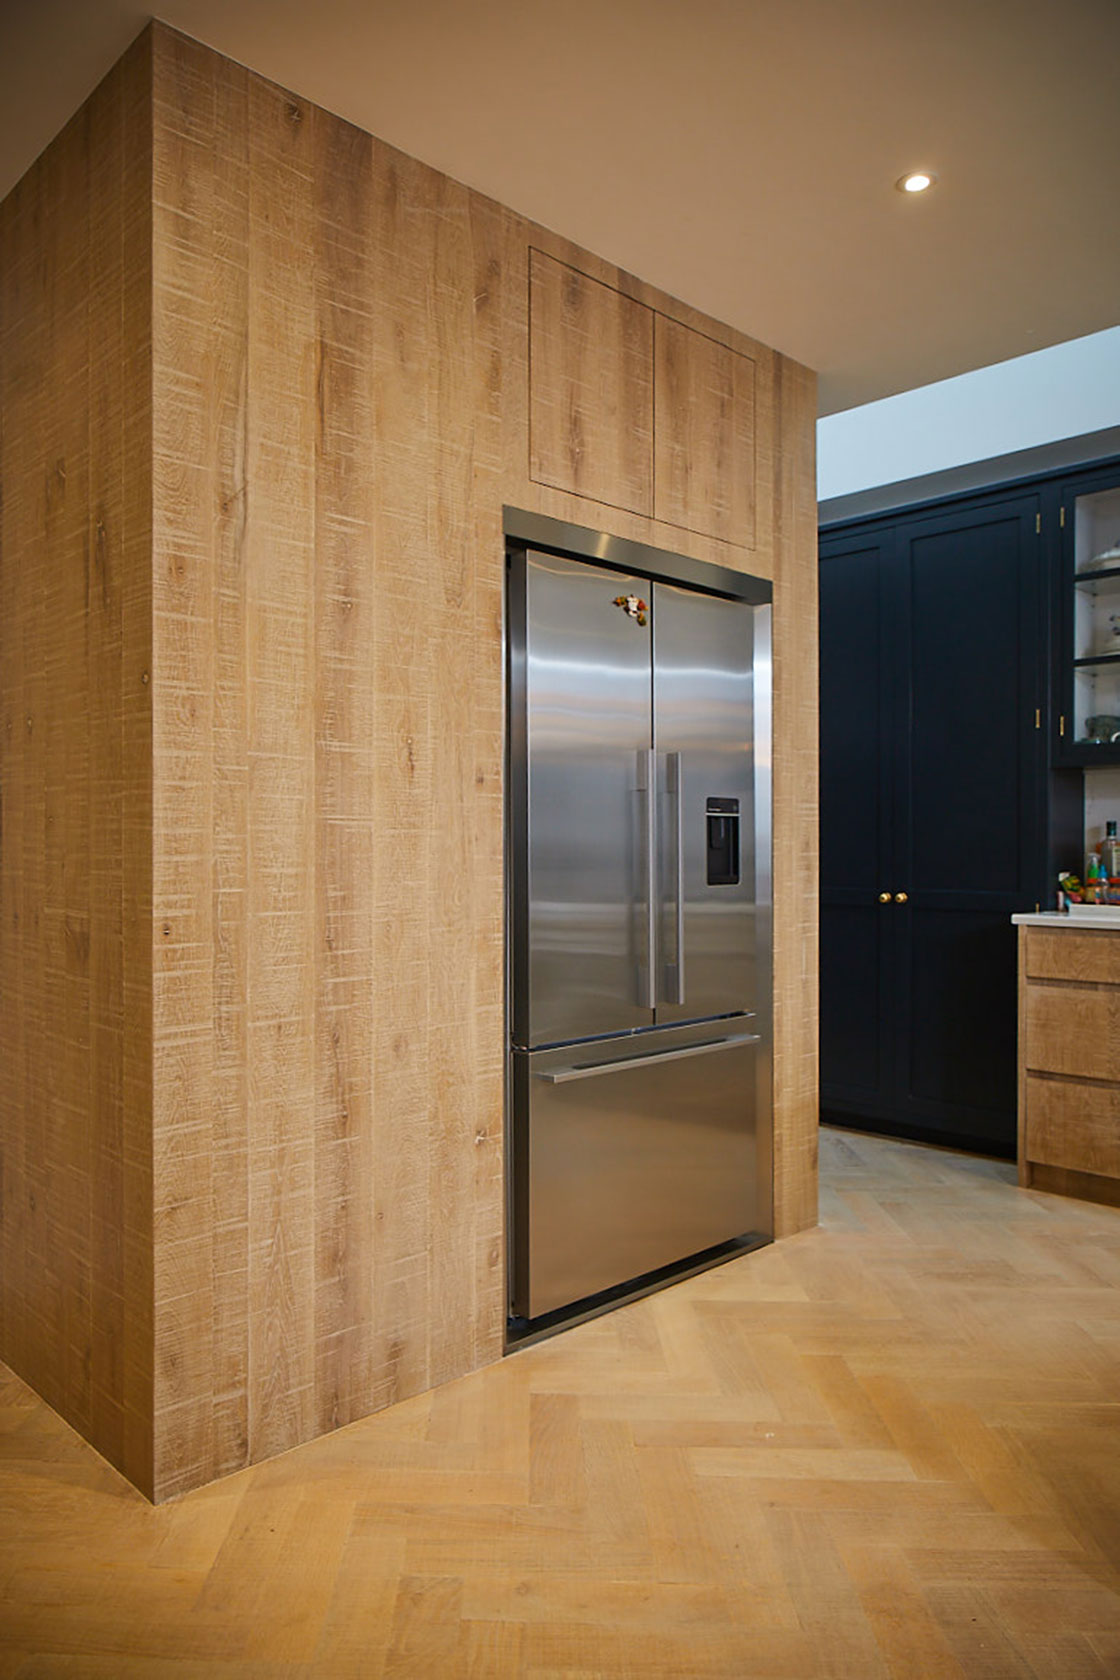 American stainless fridge freezer integrated in to white washed oak kitchen cabinets